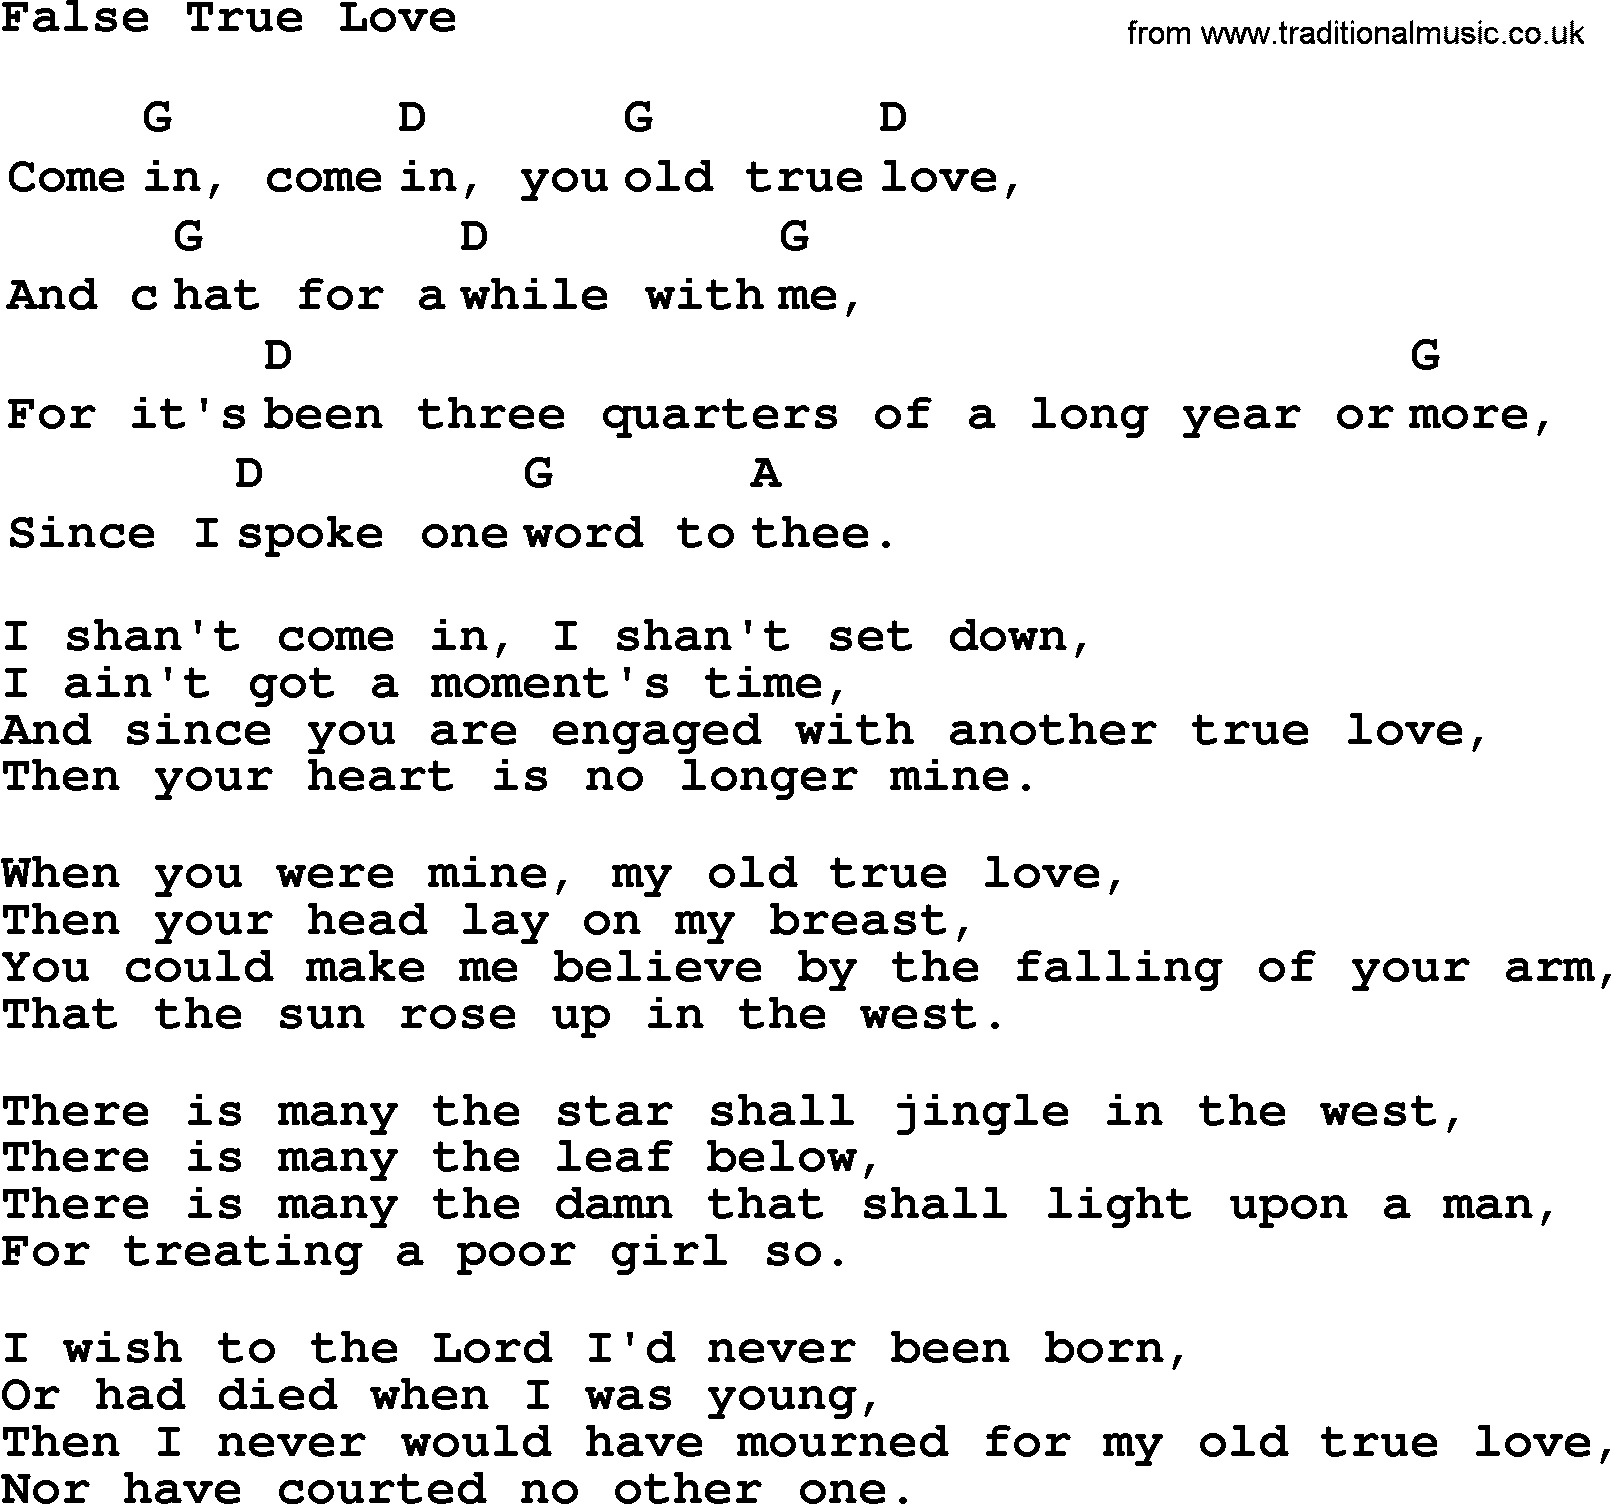 Top 1000 Most Popular Folk and Old-time Songs: False True Love, lyrics and chords